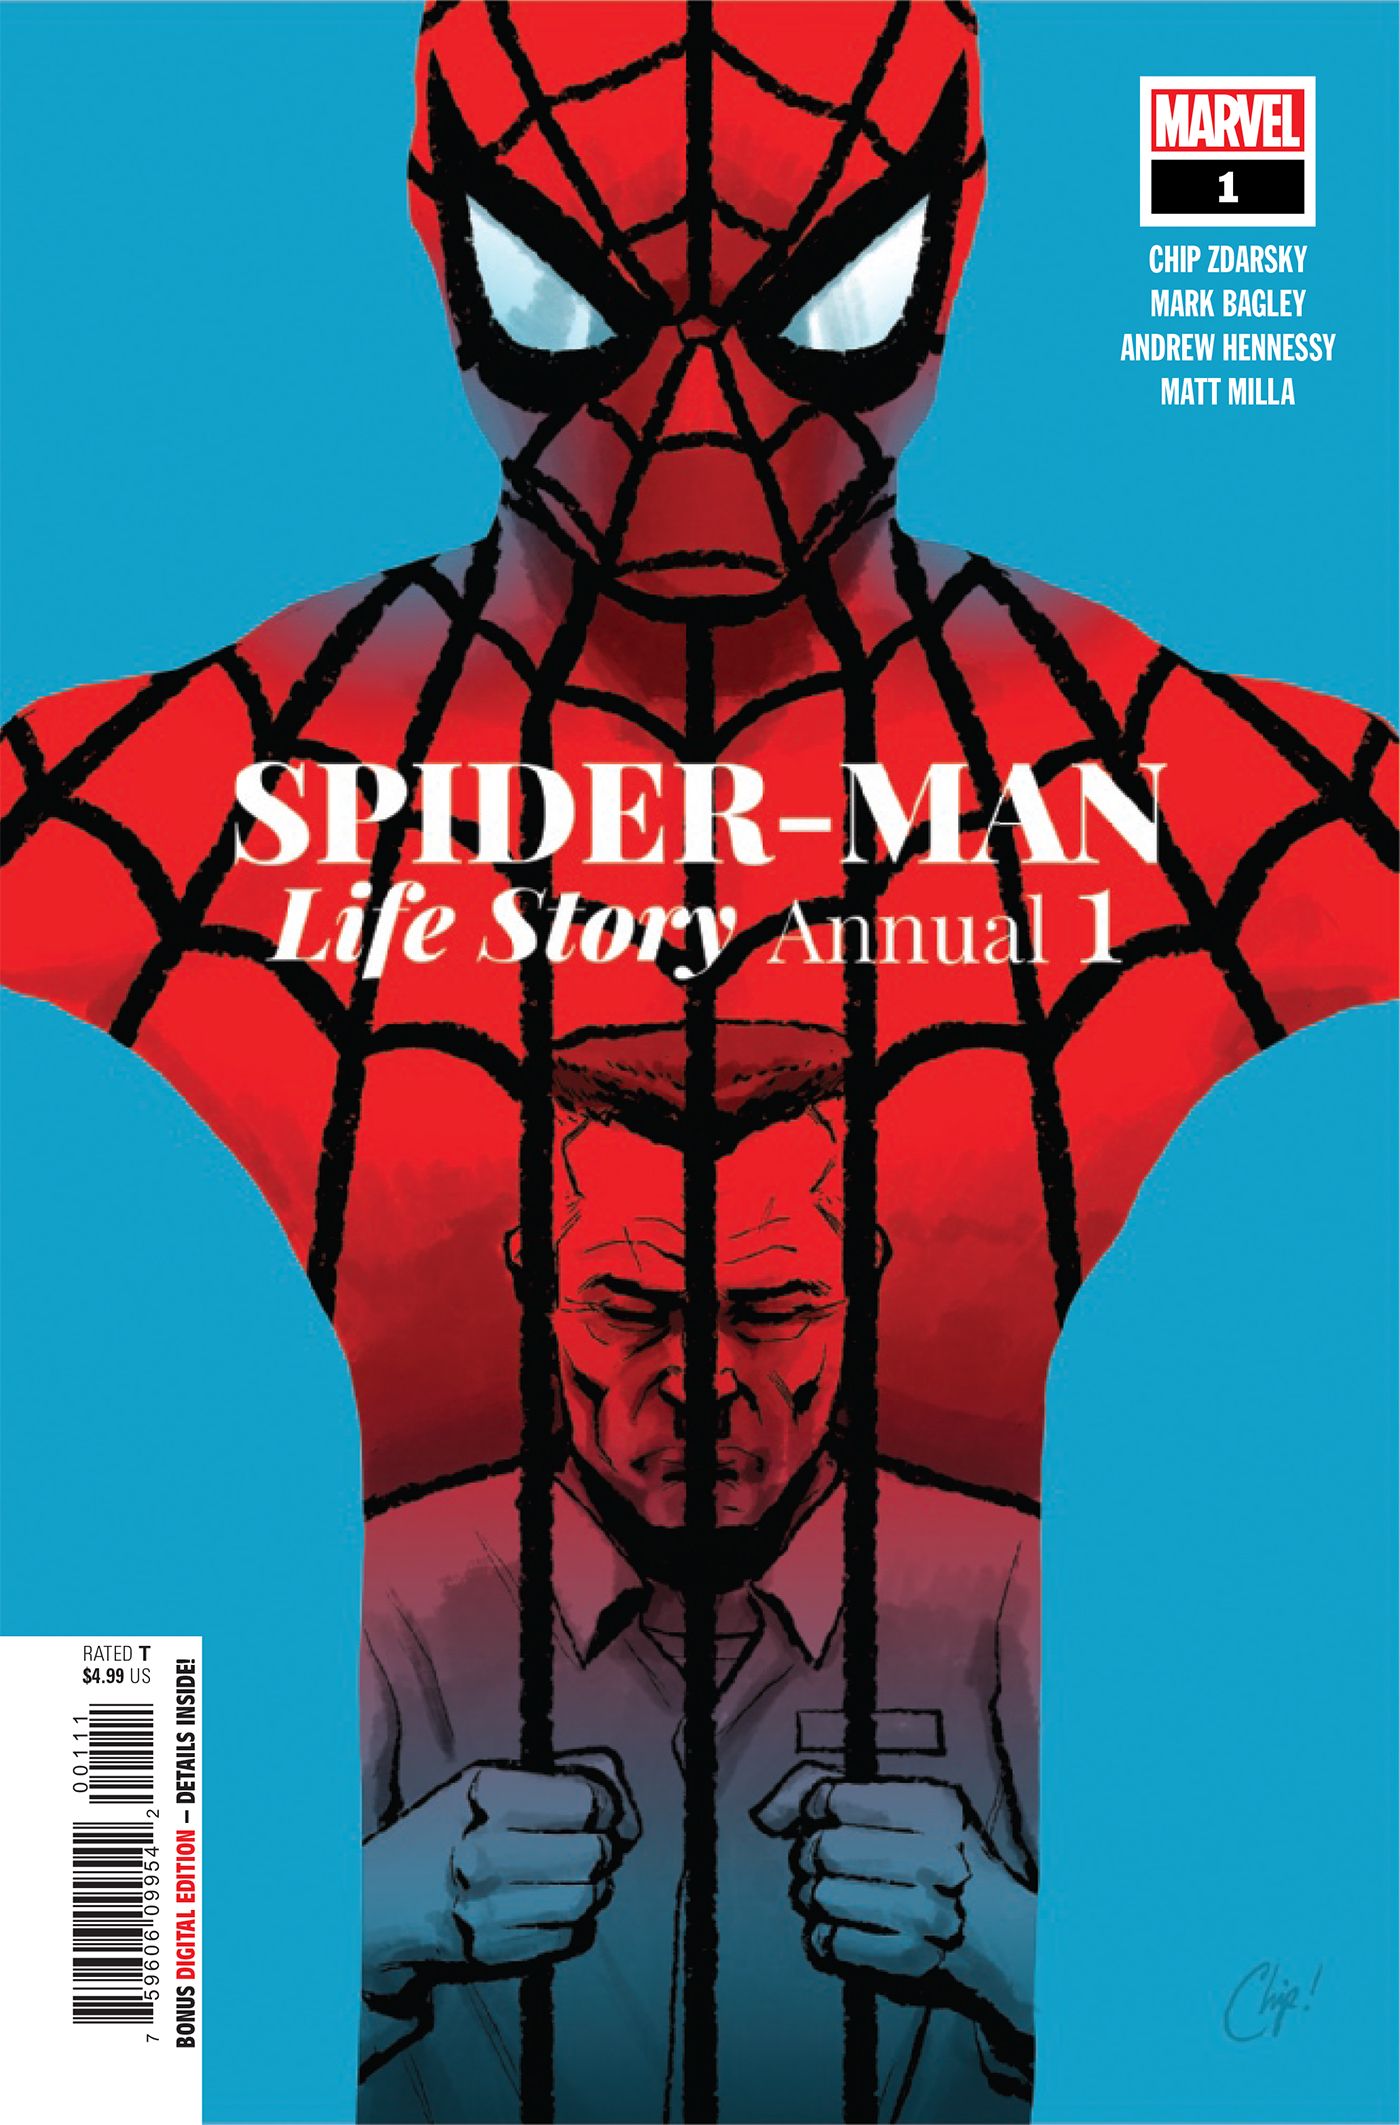 The cover for Spider-Man: Life Story Annual #1.